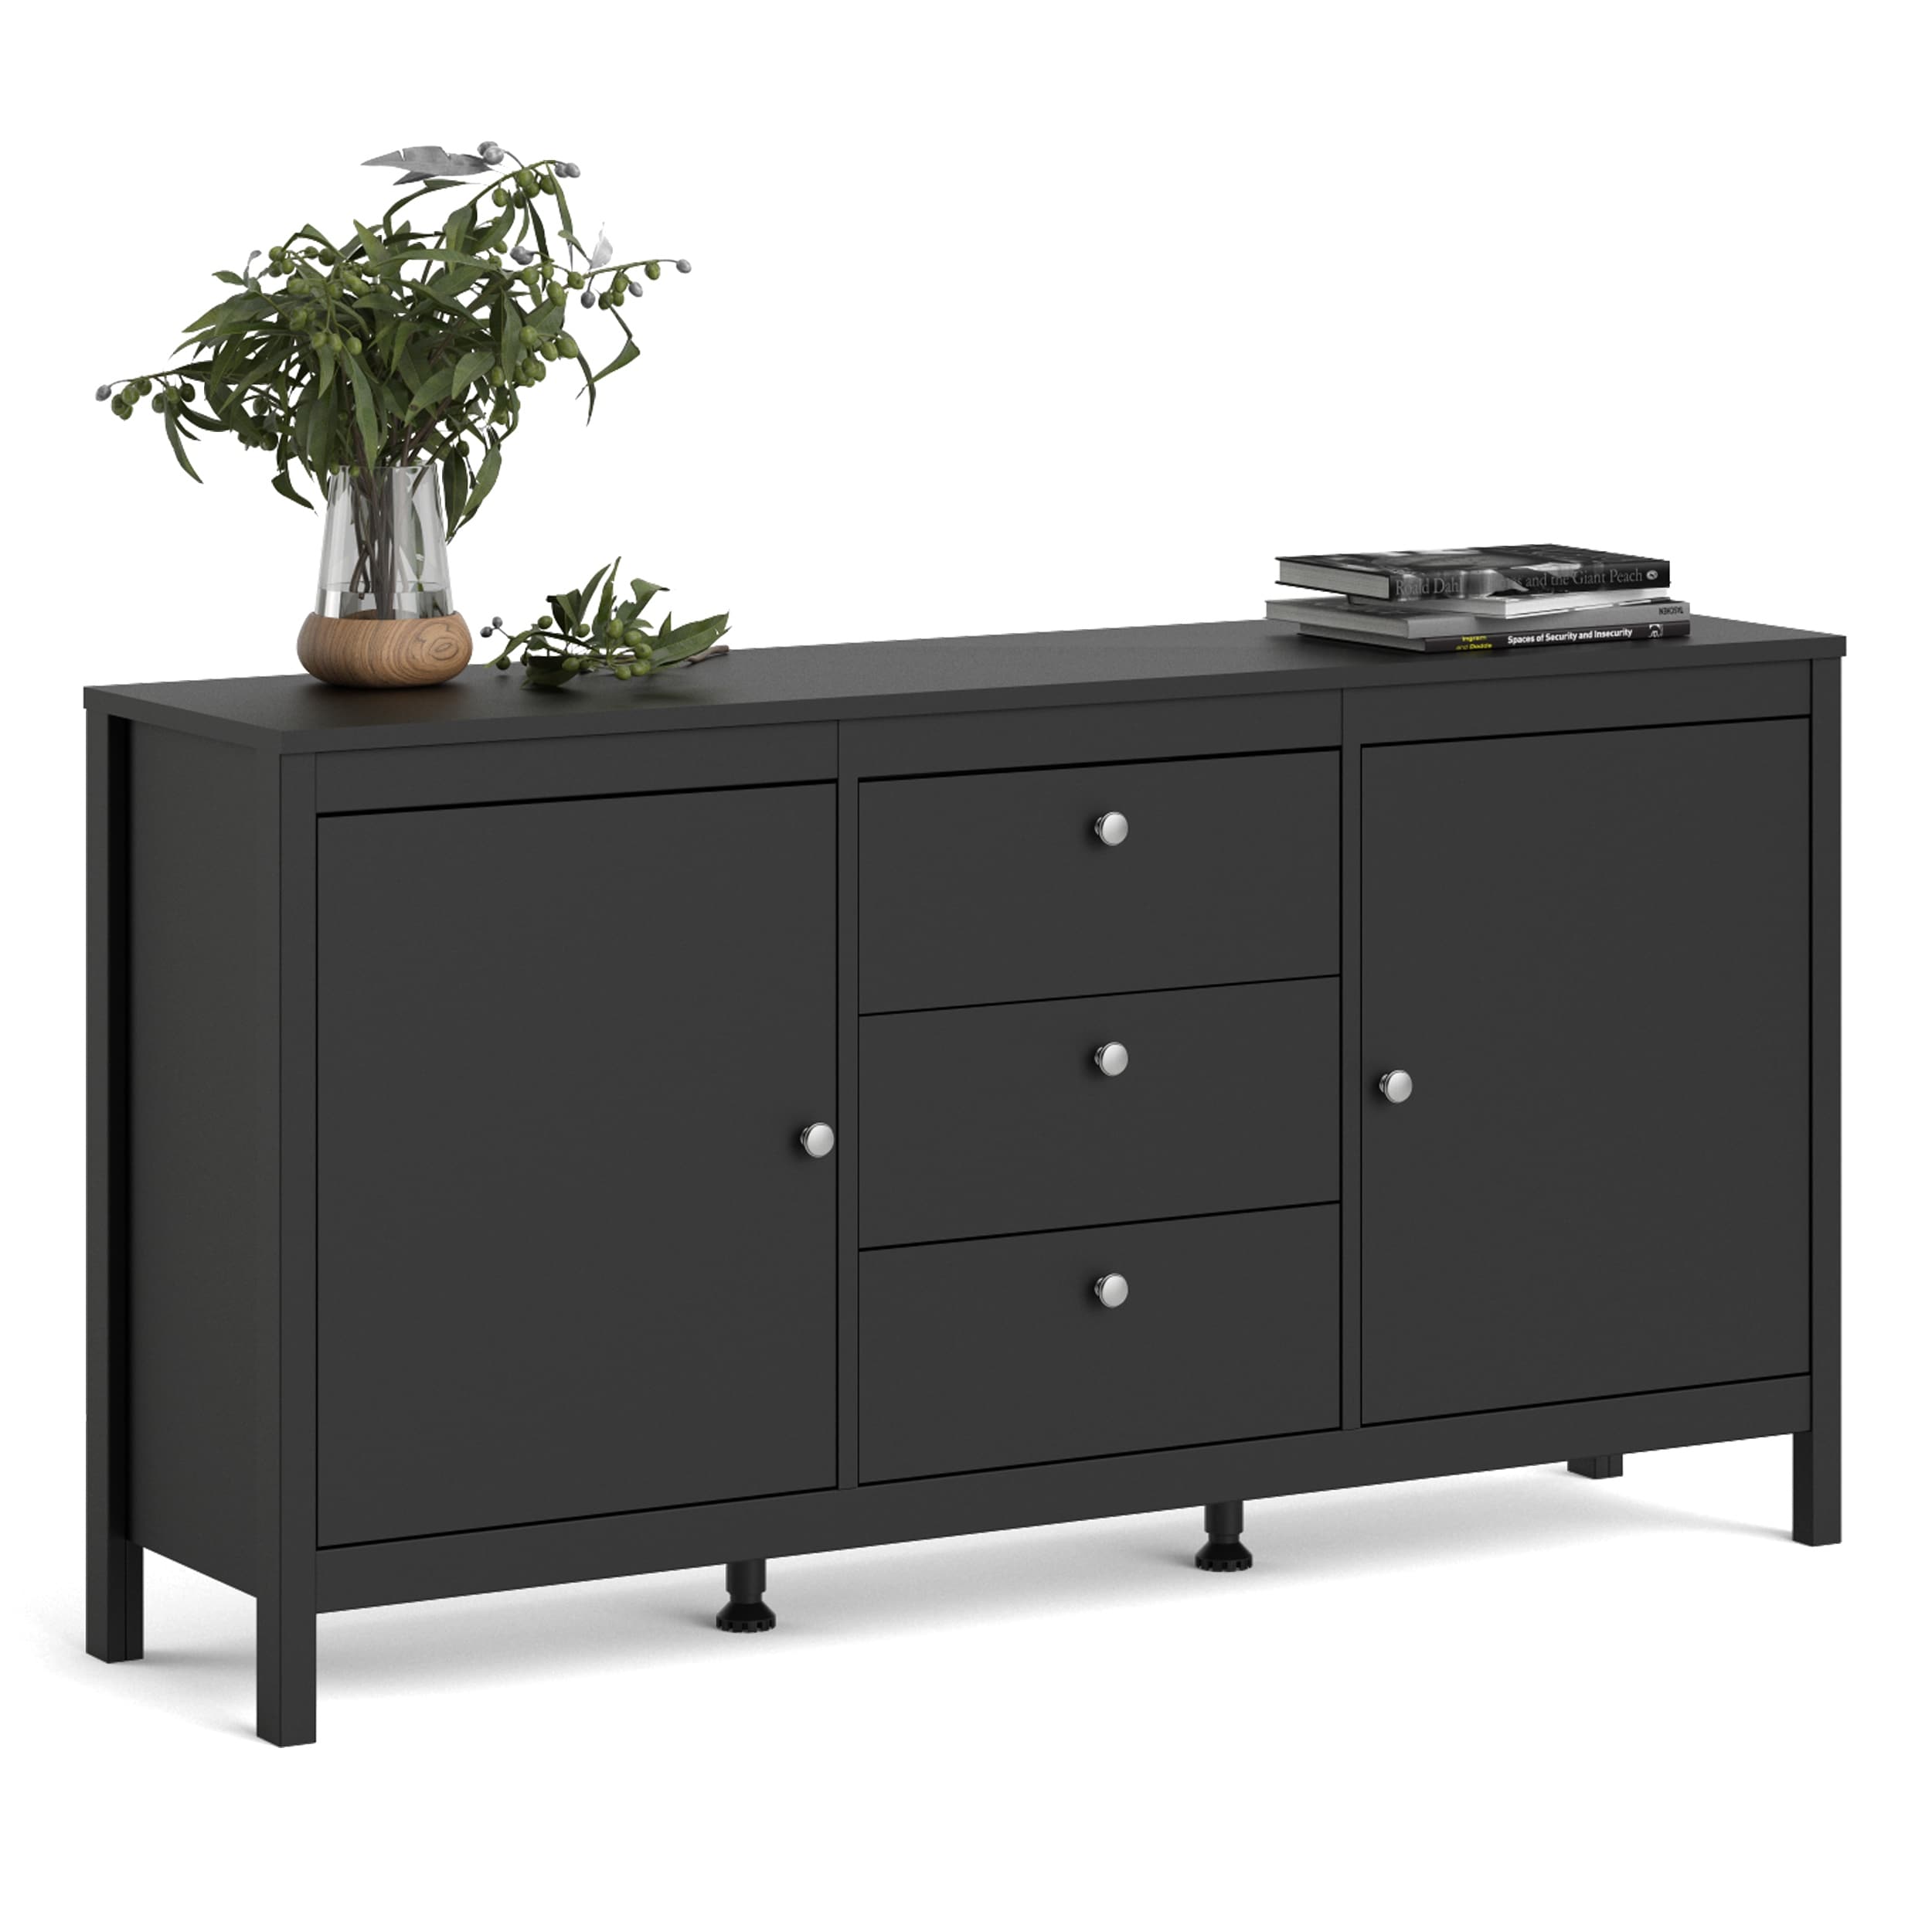 Porch & Den Beyond with & - 33673465 2-Door Madrid Sale On Sideboard - 3-Drawers Bed - Bath